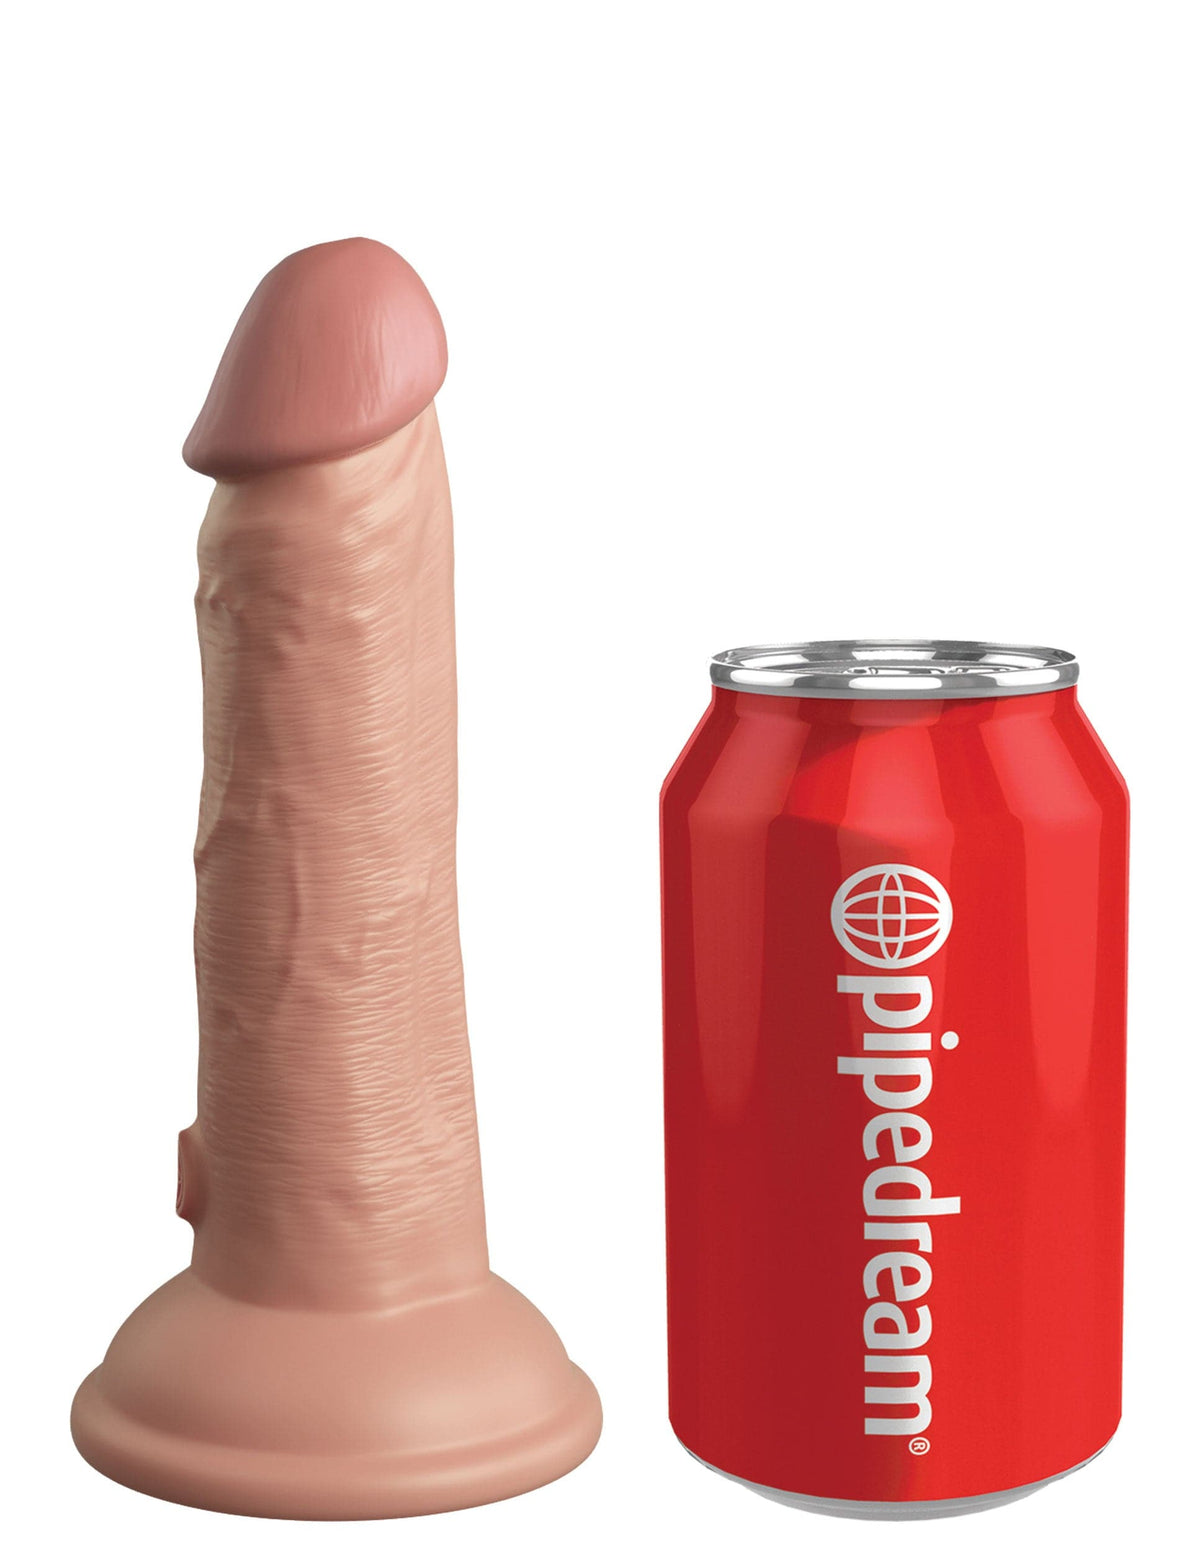 king cock elite 6 inch vibrating silicone dual silicone dual density cock light